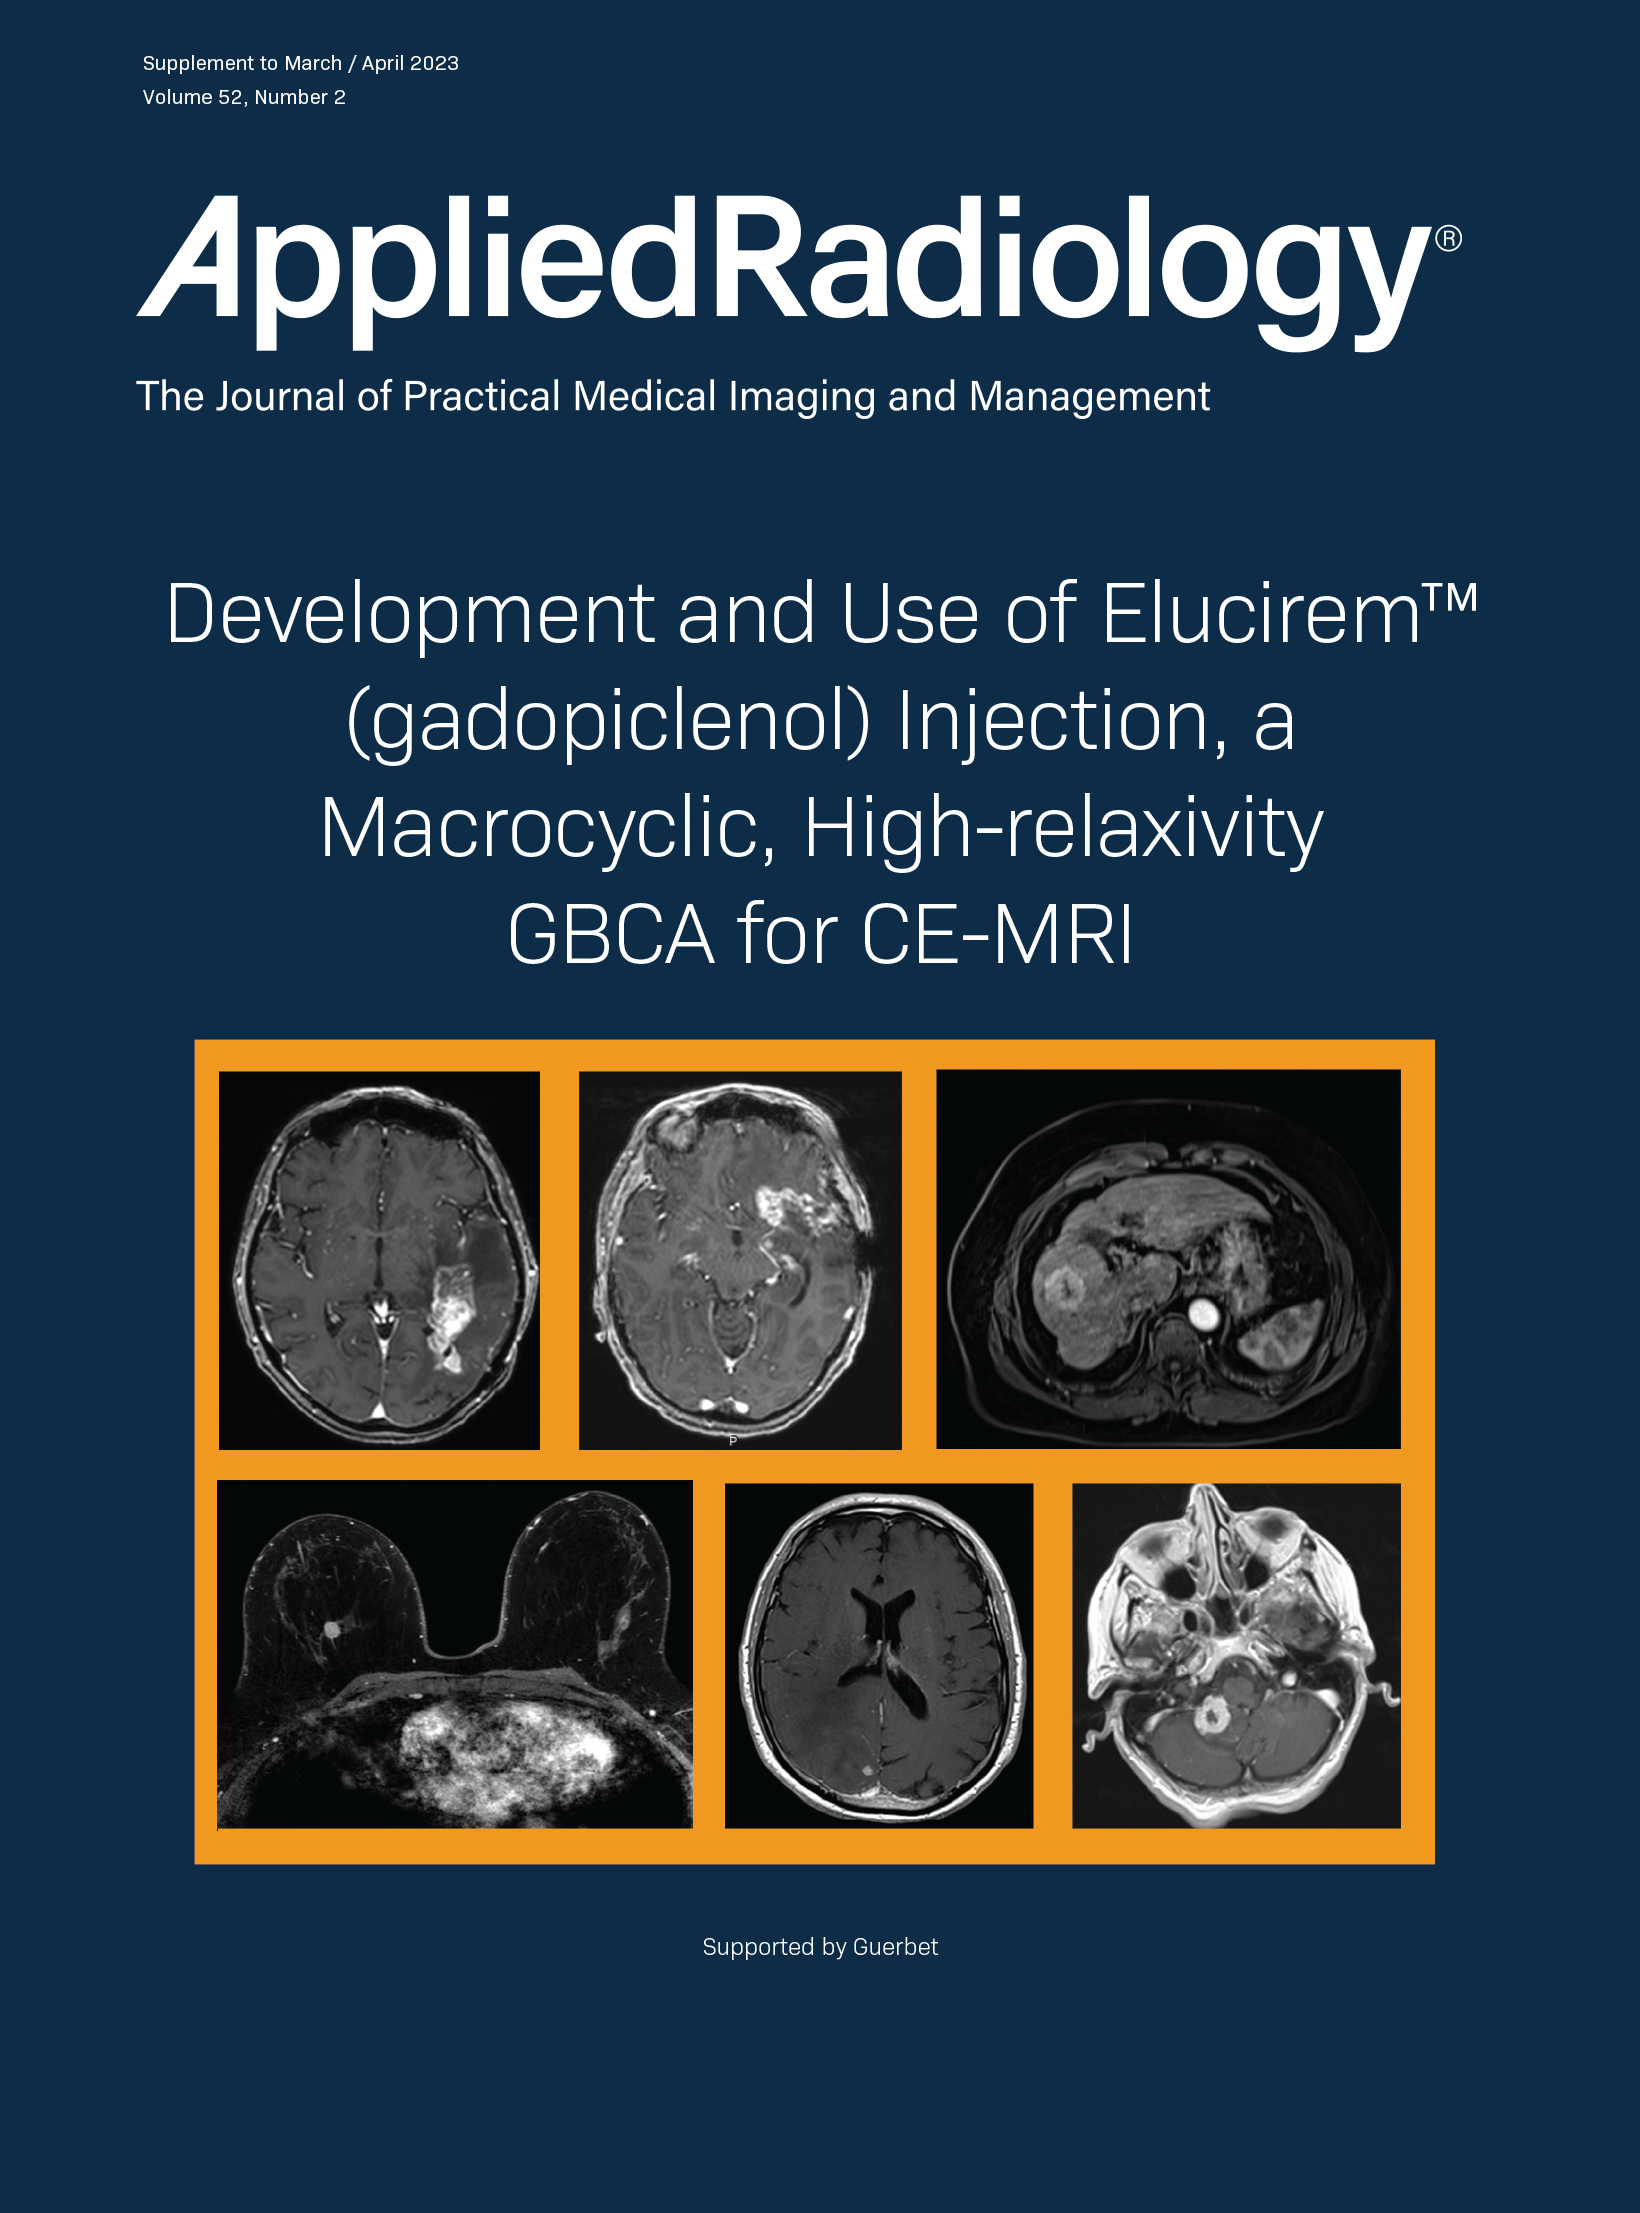 Supplement to Applied Radiology March-April 2023